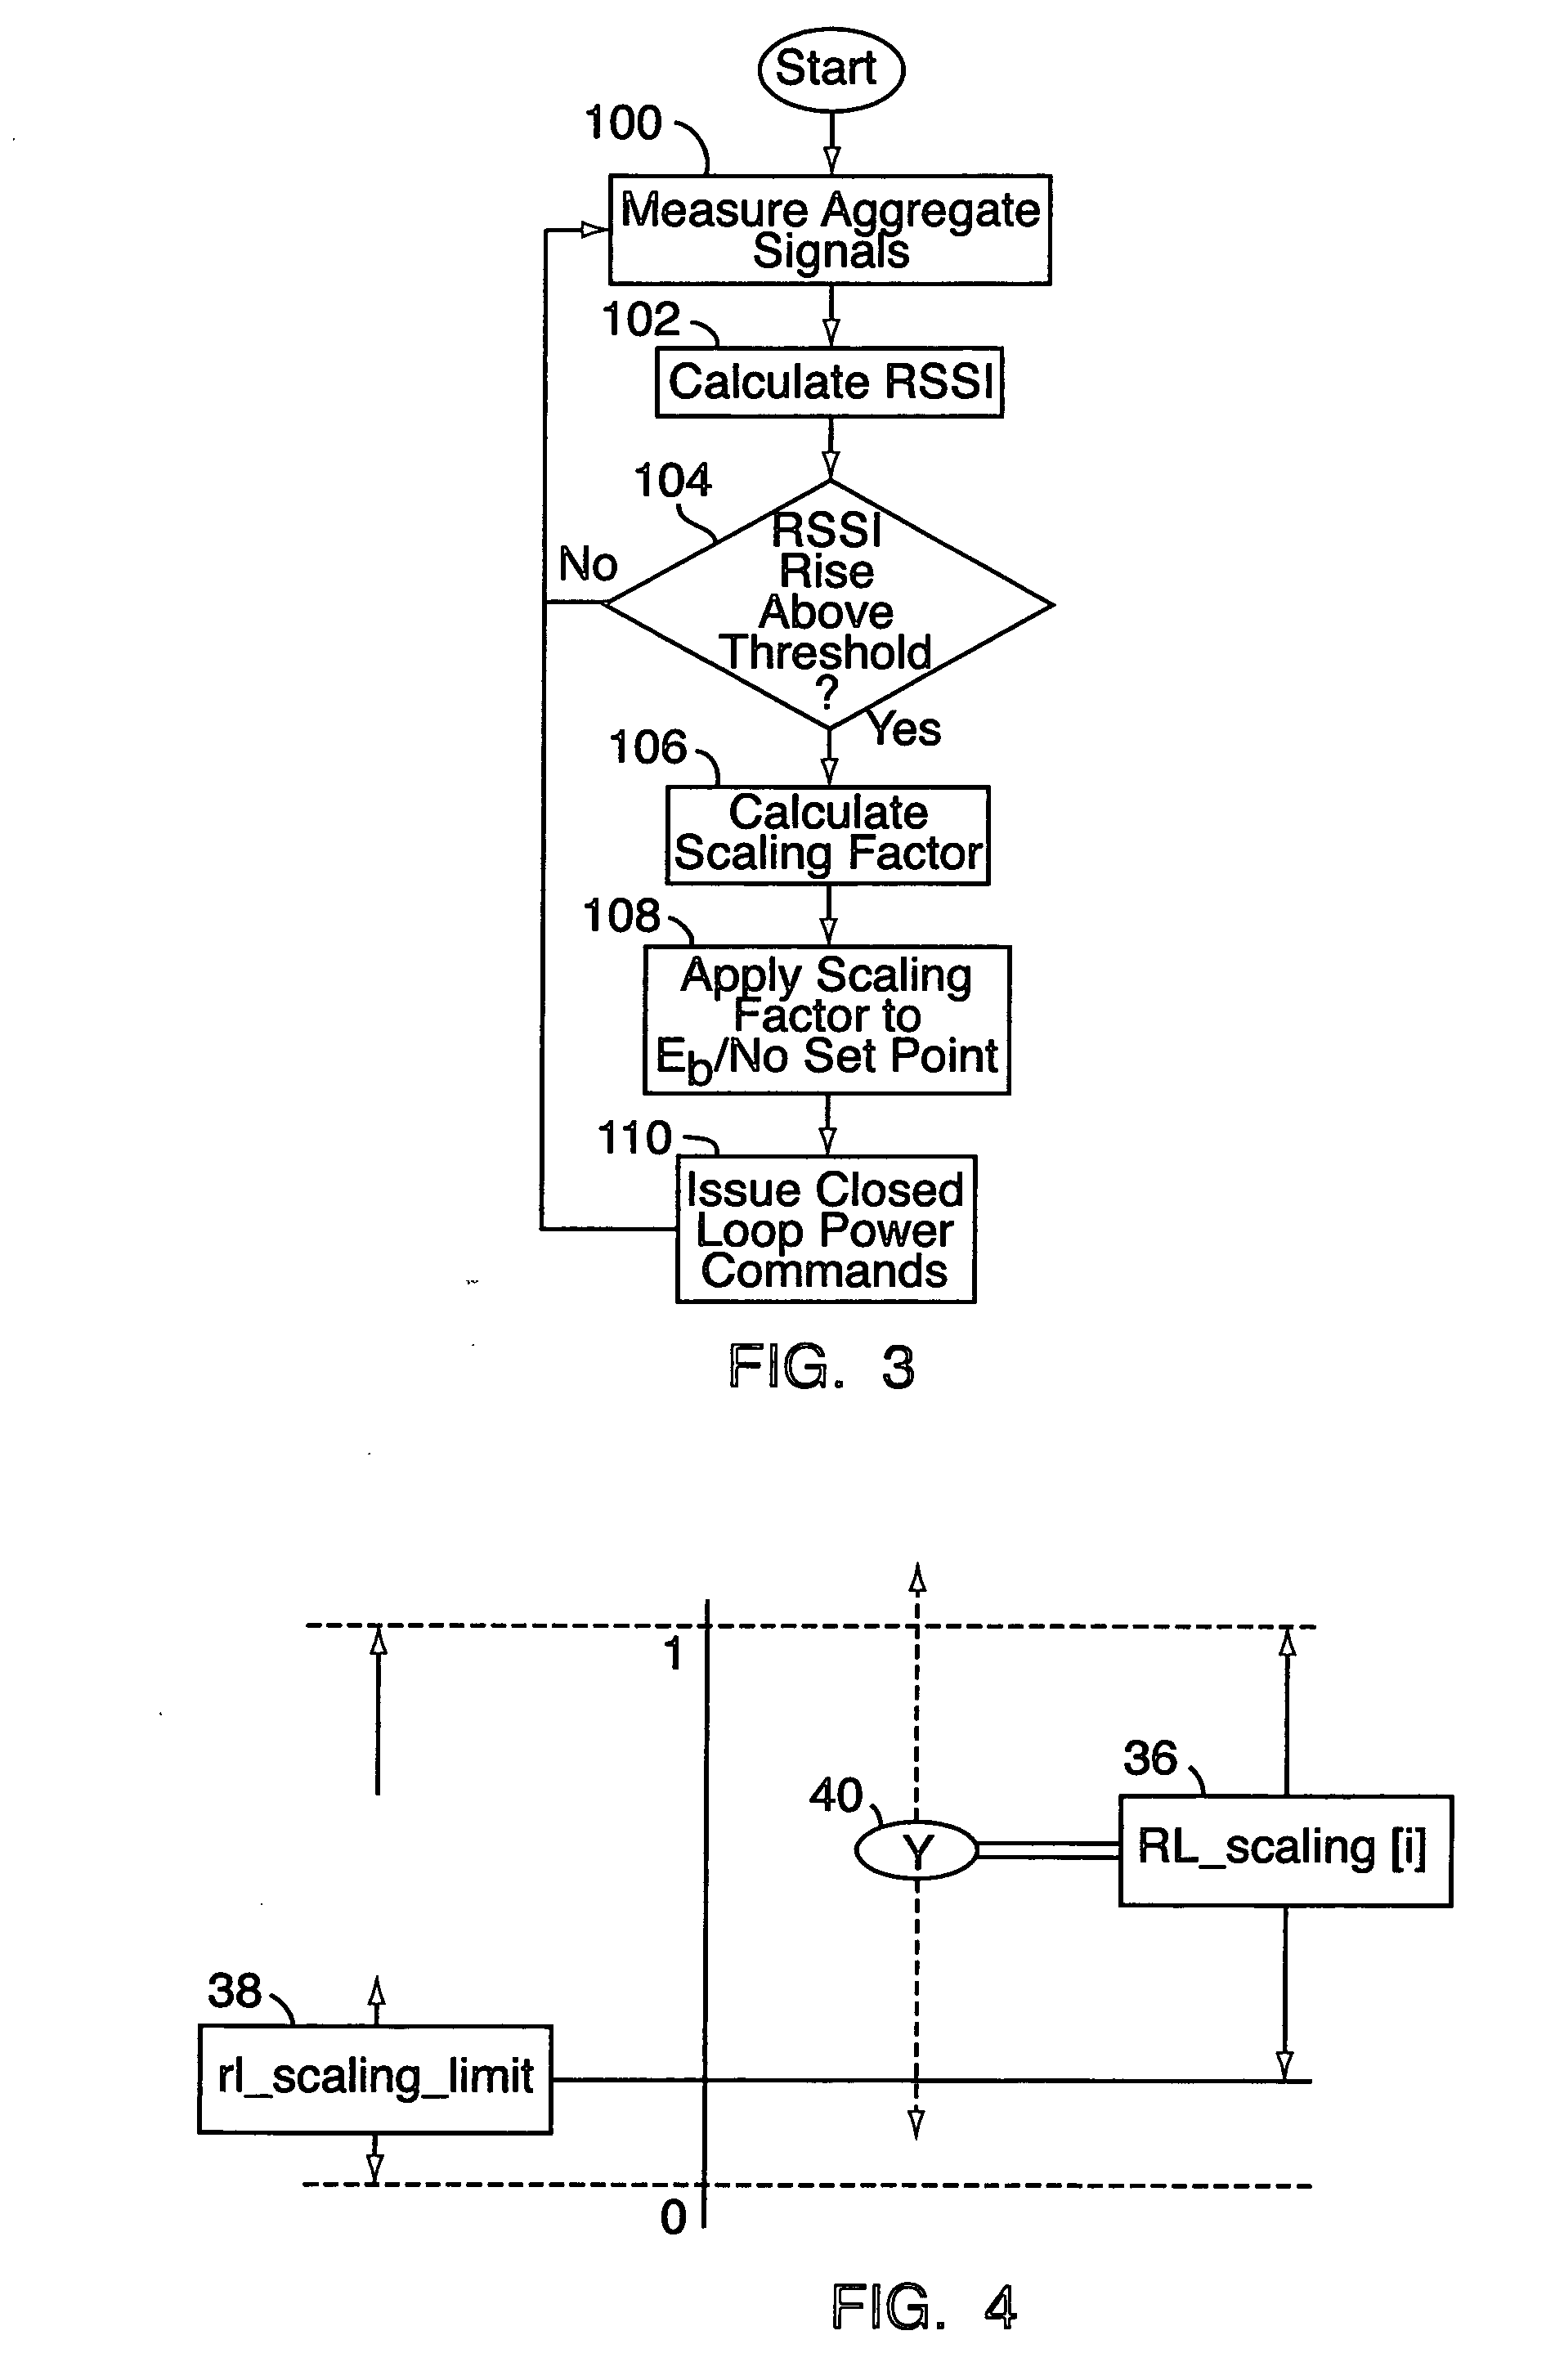 Method for extracting optimal reverse link capacity by scaling reverse link Eb/No setpoint based on aggregate channel load and condition